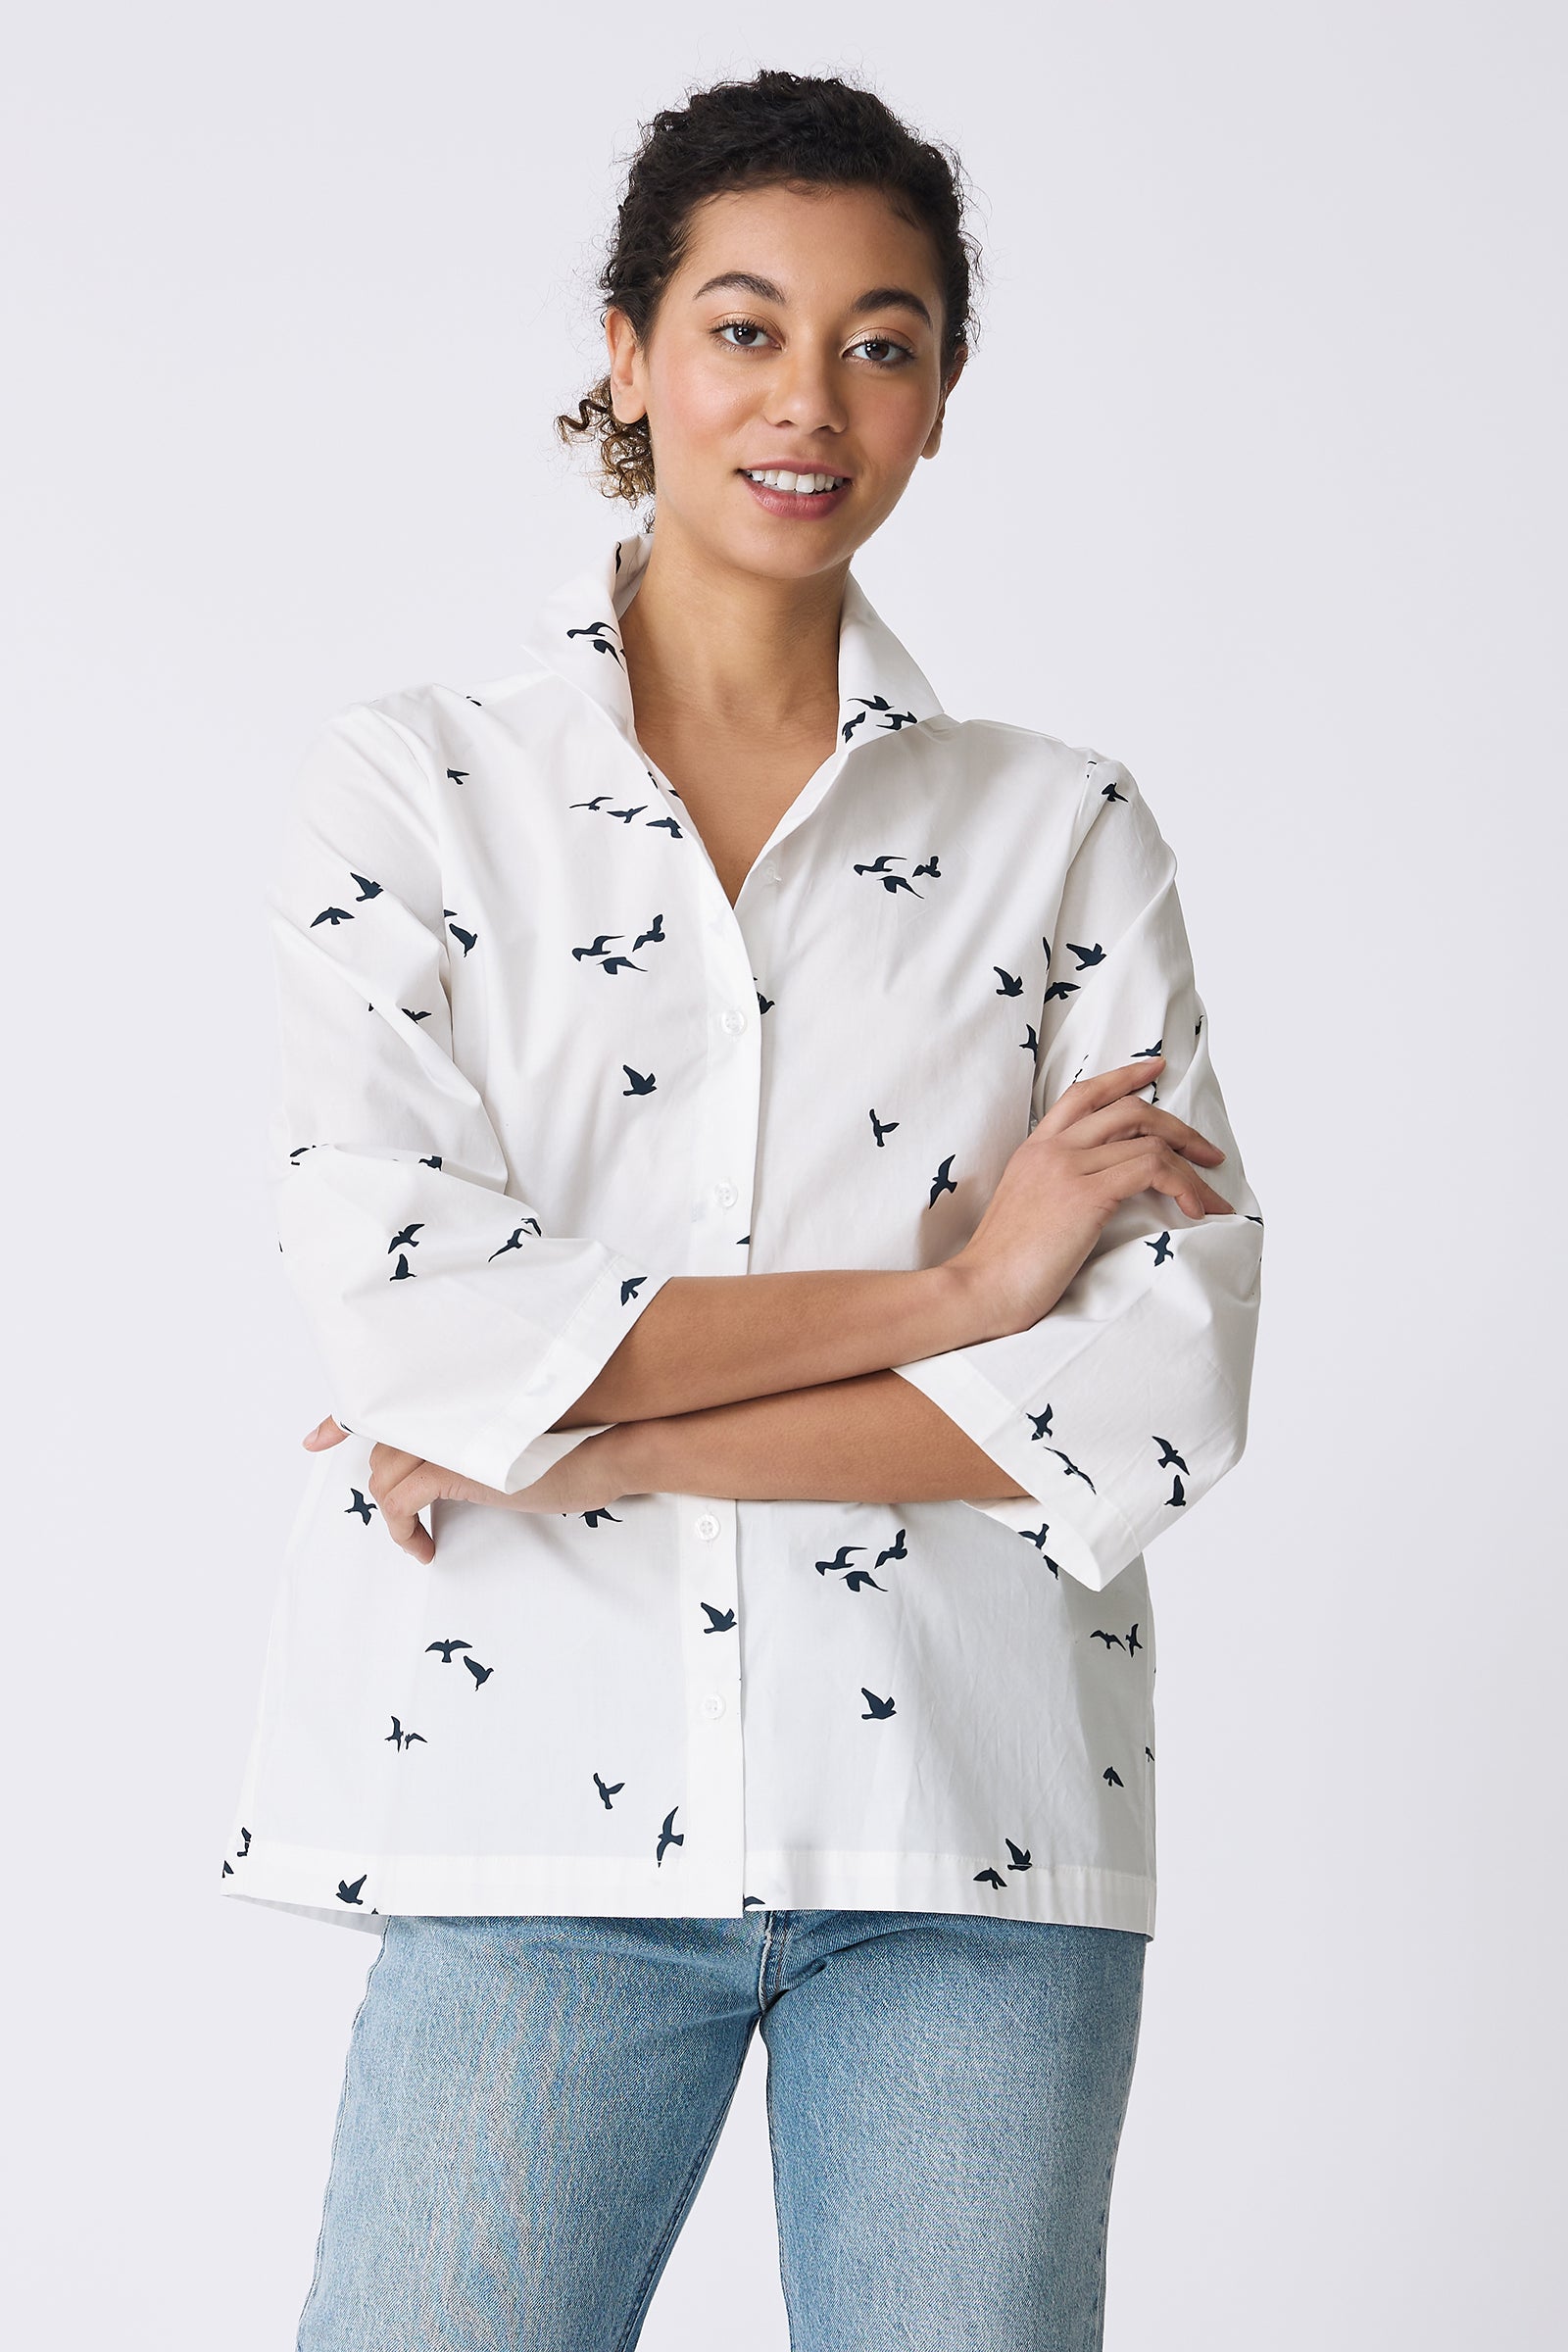 Kal Rieman 3/4 Sleeve Ginna Shirt in White Bird Print on model with arms crossed front view